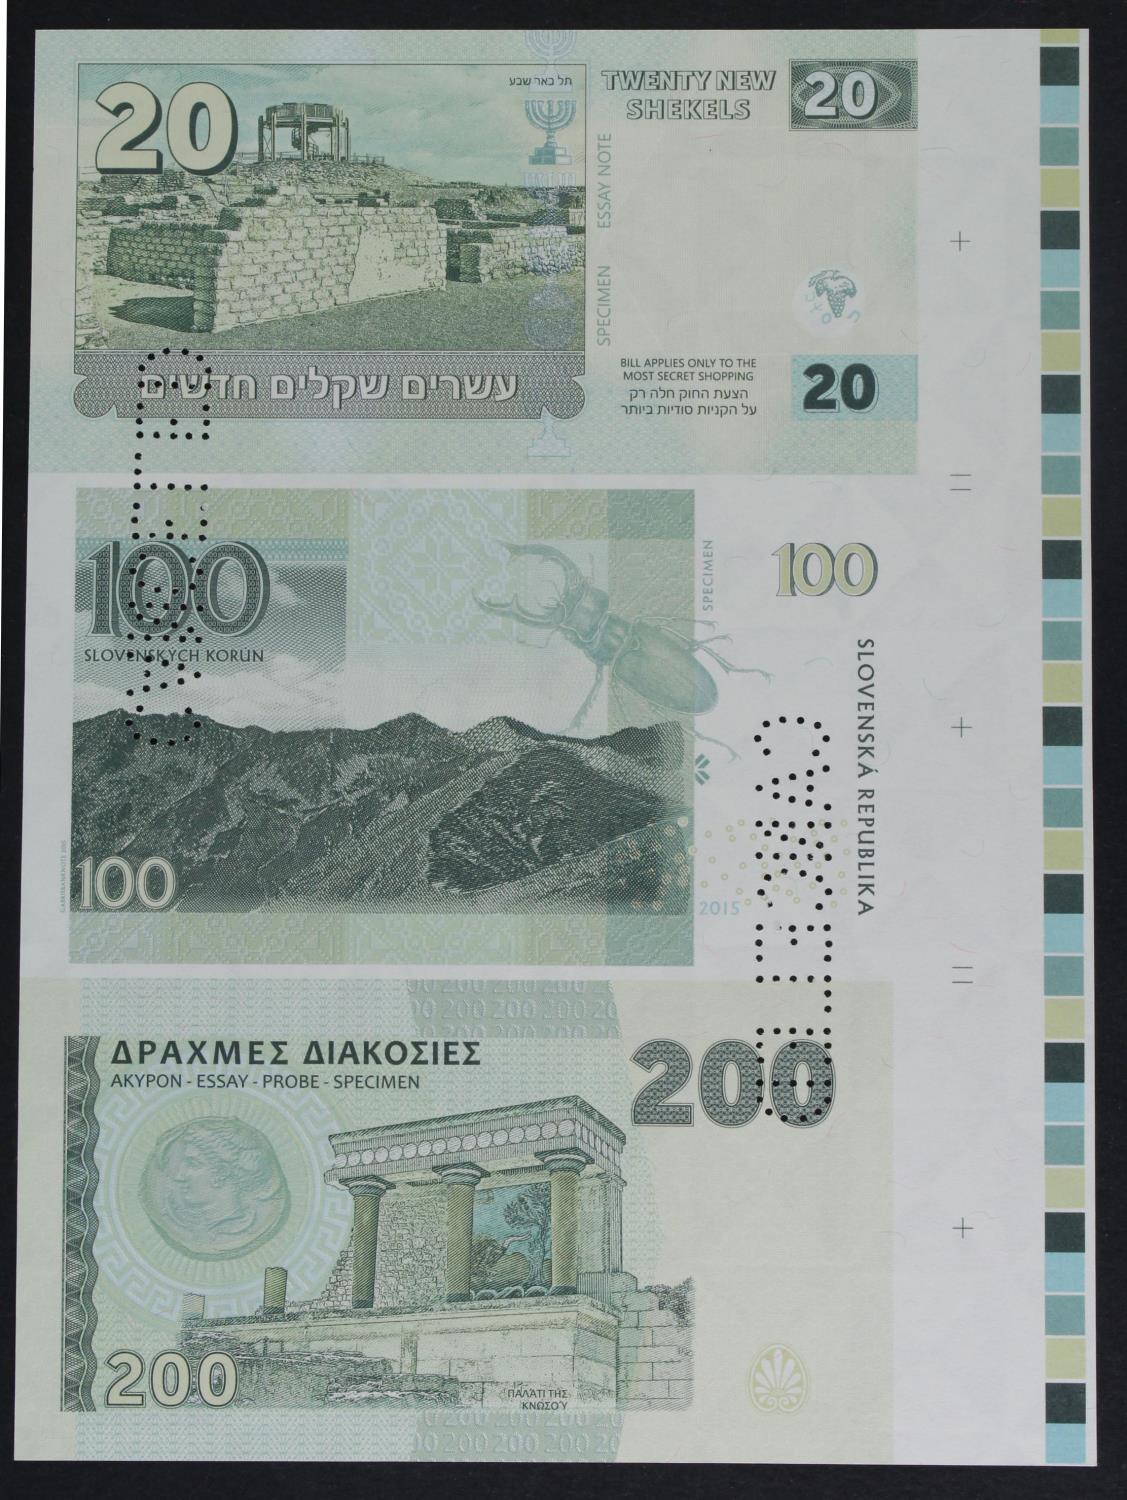 Test Note, an uncut sheet of 3 notes, Israel 20 Shekels Ziva David 'Mossad banknote' on front - Image 2 of 2